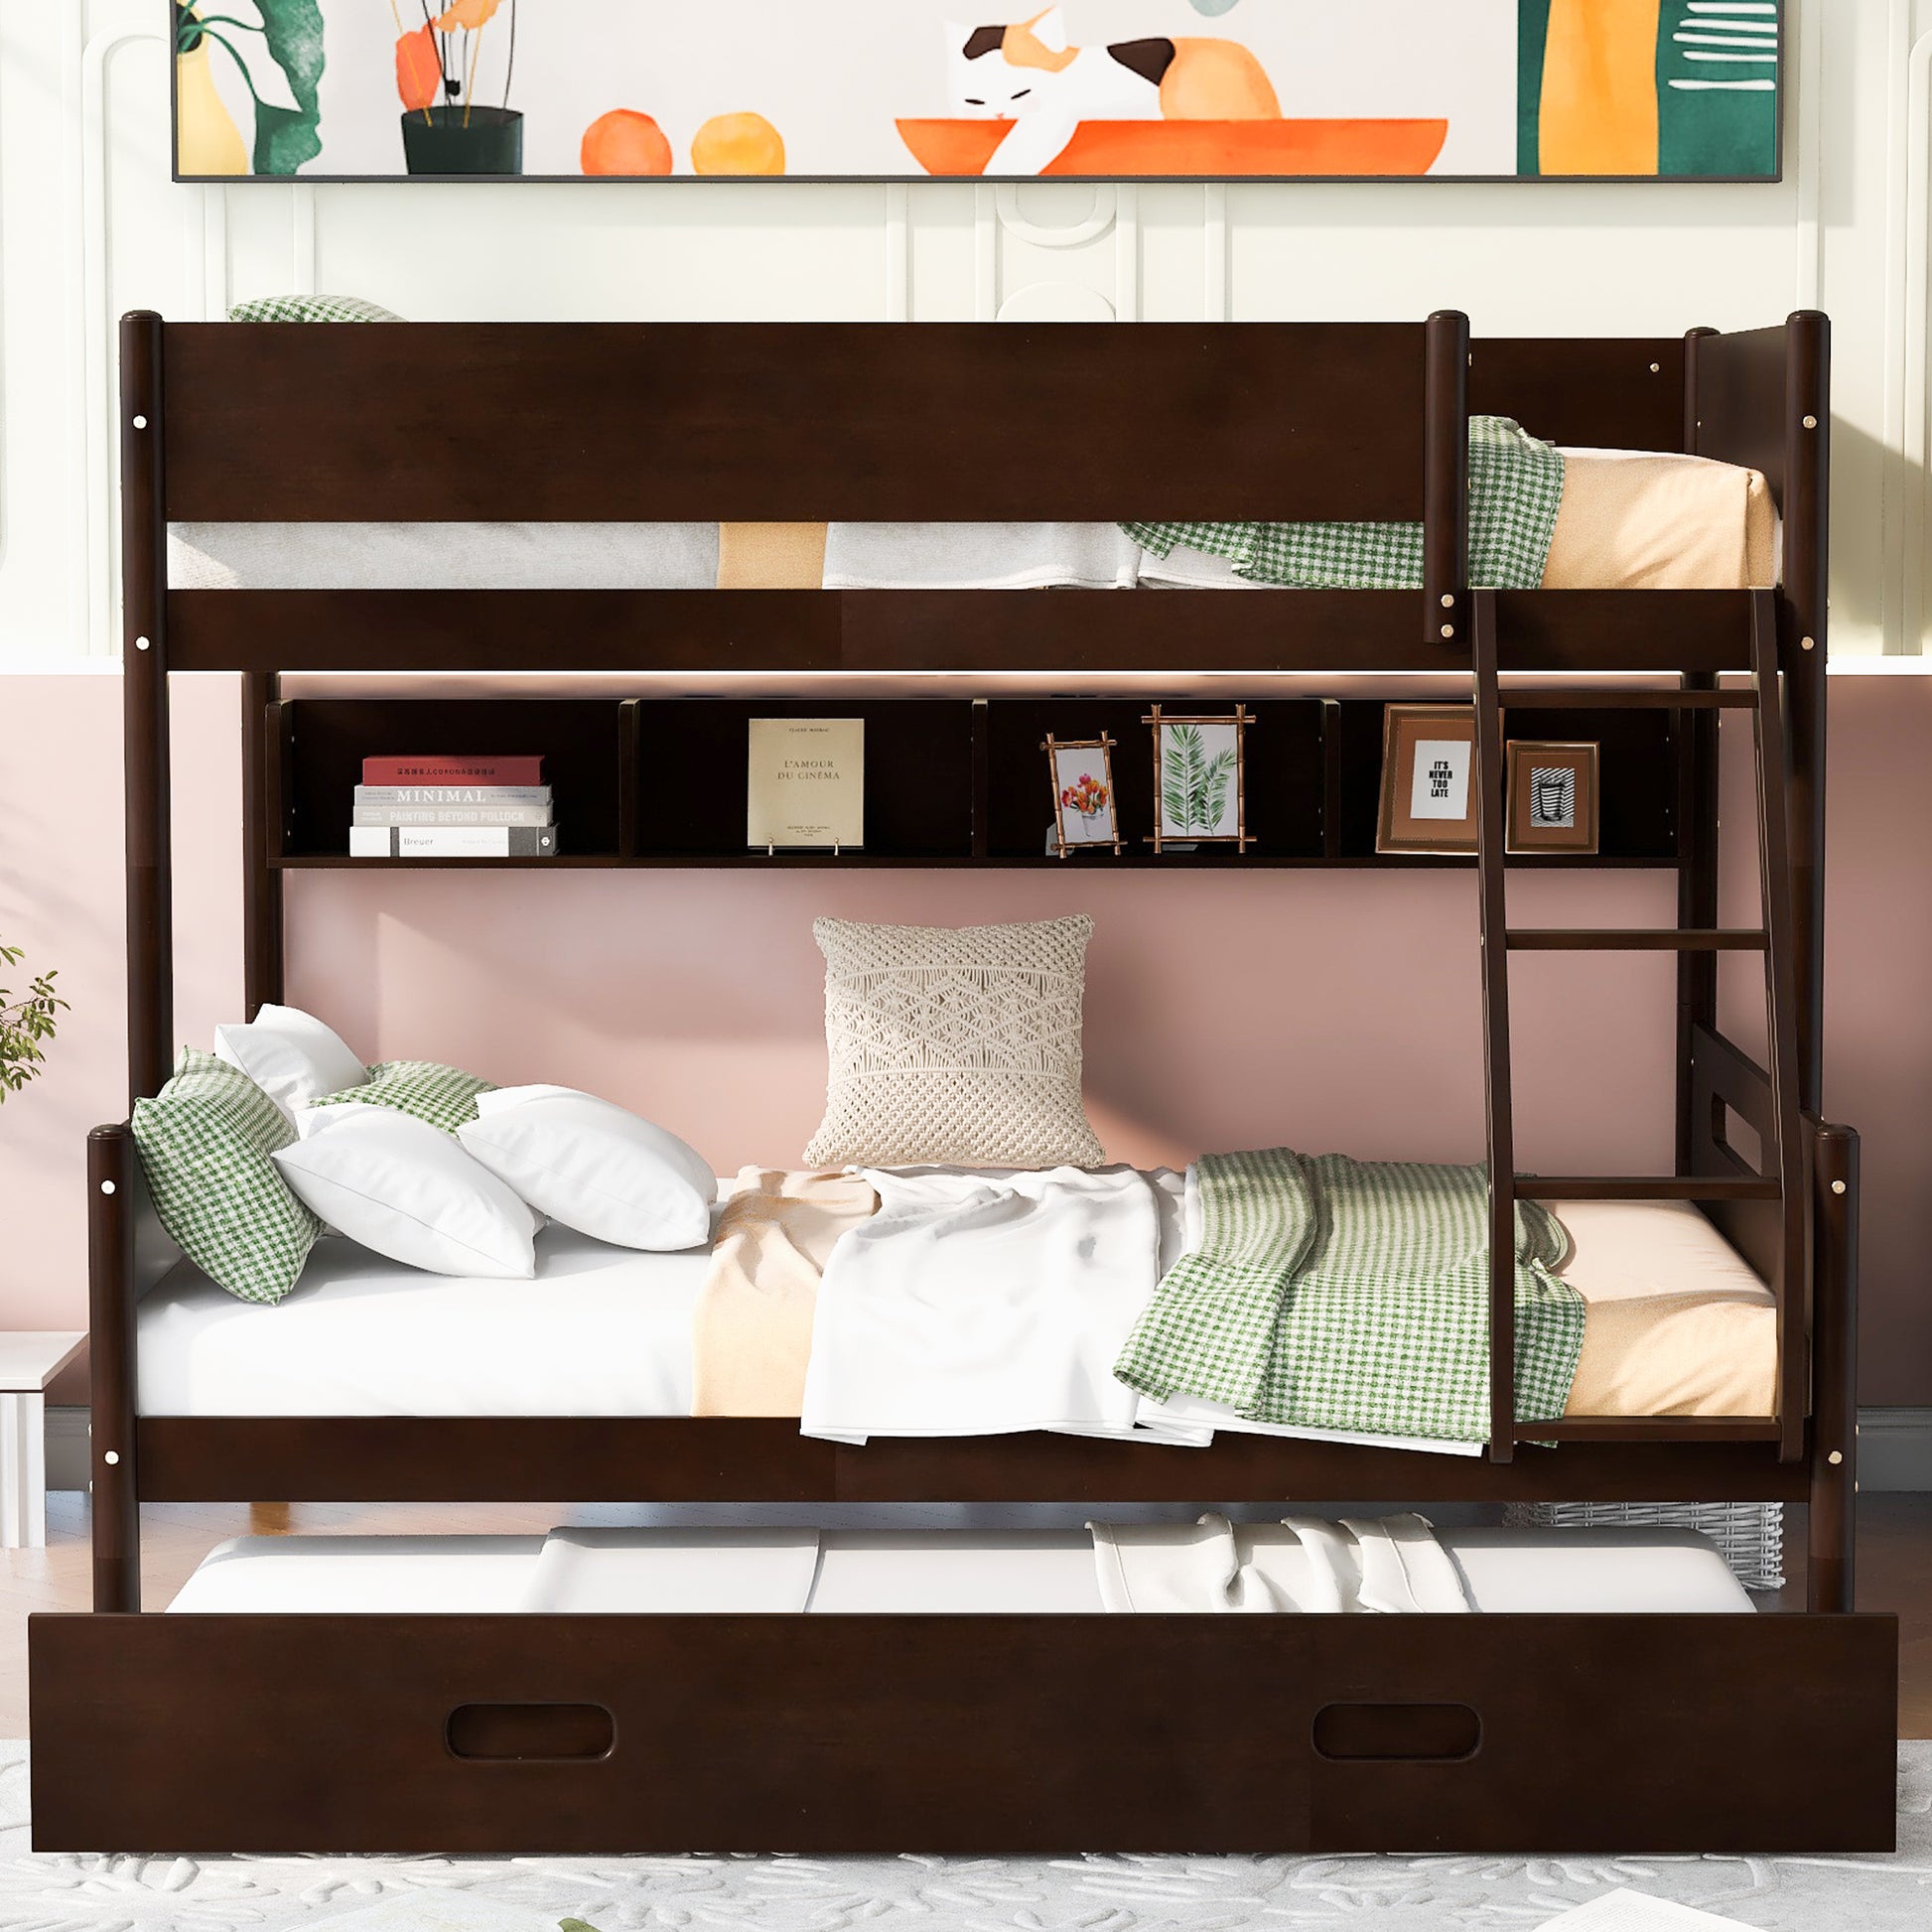 Wood Twin over Full Bunk Bed with Storage Shelves and Twin Size Trundle, Espresso - Enova Luxe Home Store